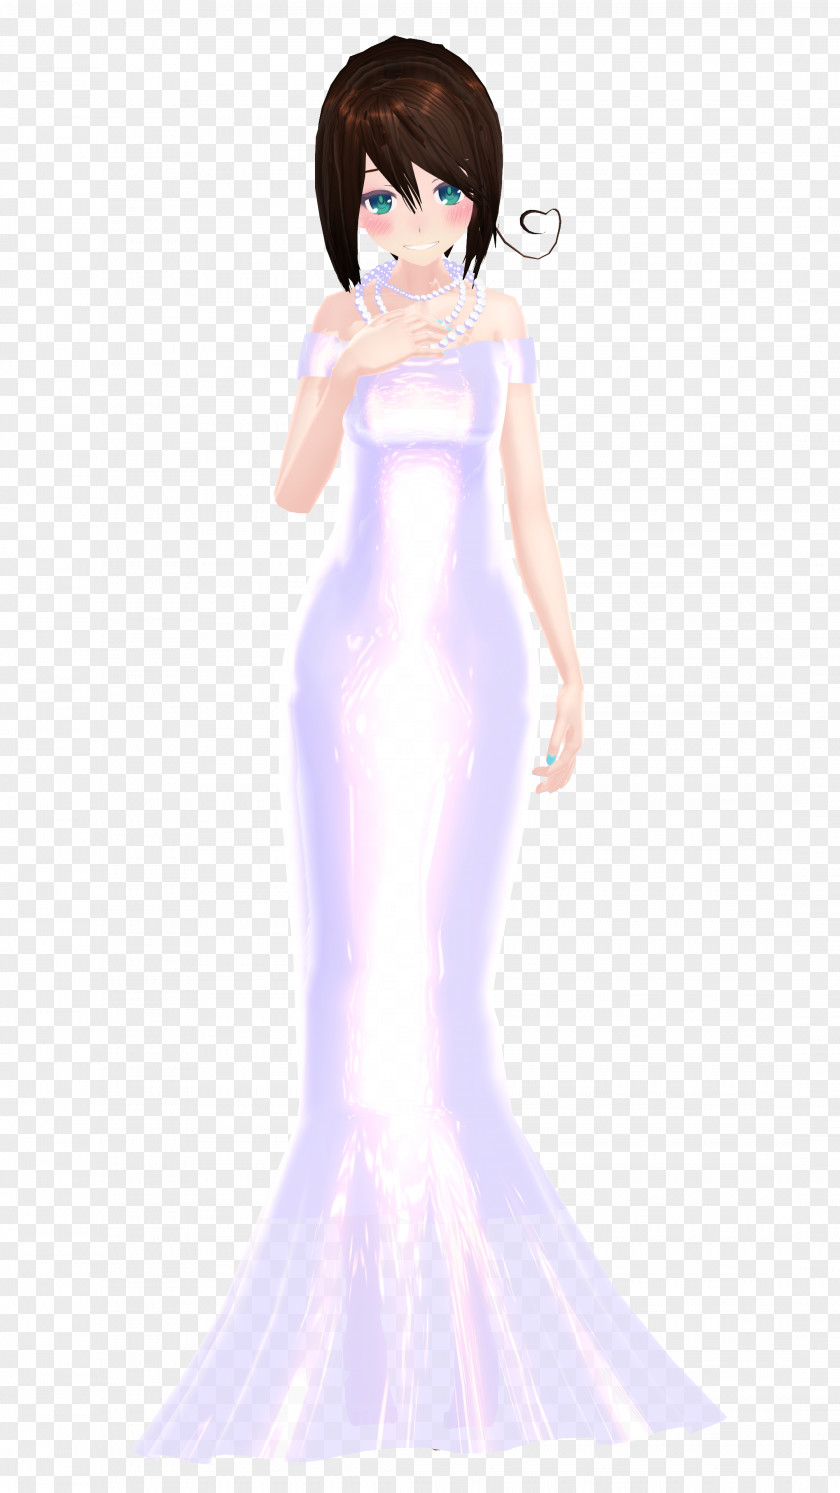 Getting Ready Gown Shoulder Character PNG